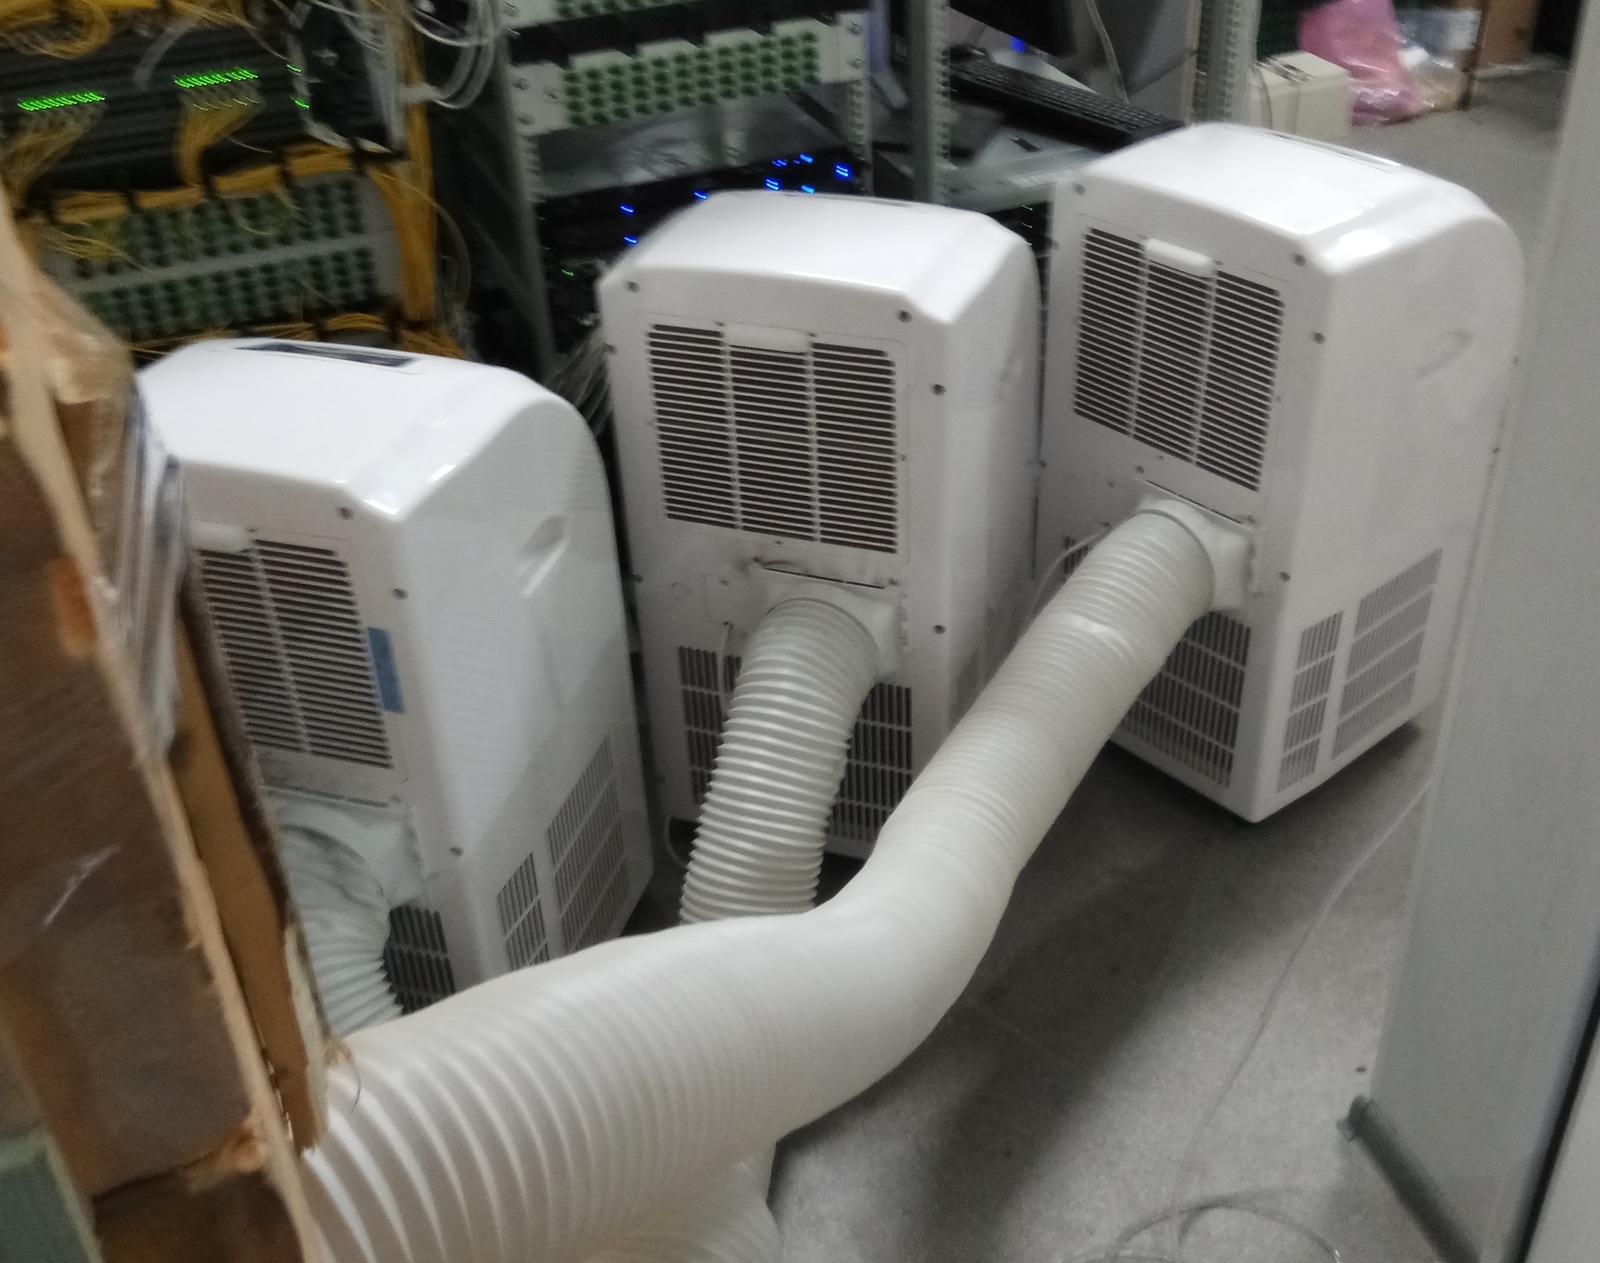 Hipster server room cooling - My, Support service, Server, Air conditioner, Penoplex, Collective farm, Tuning, It works, Longpost